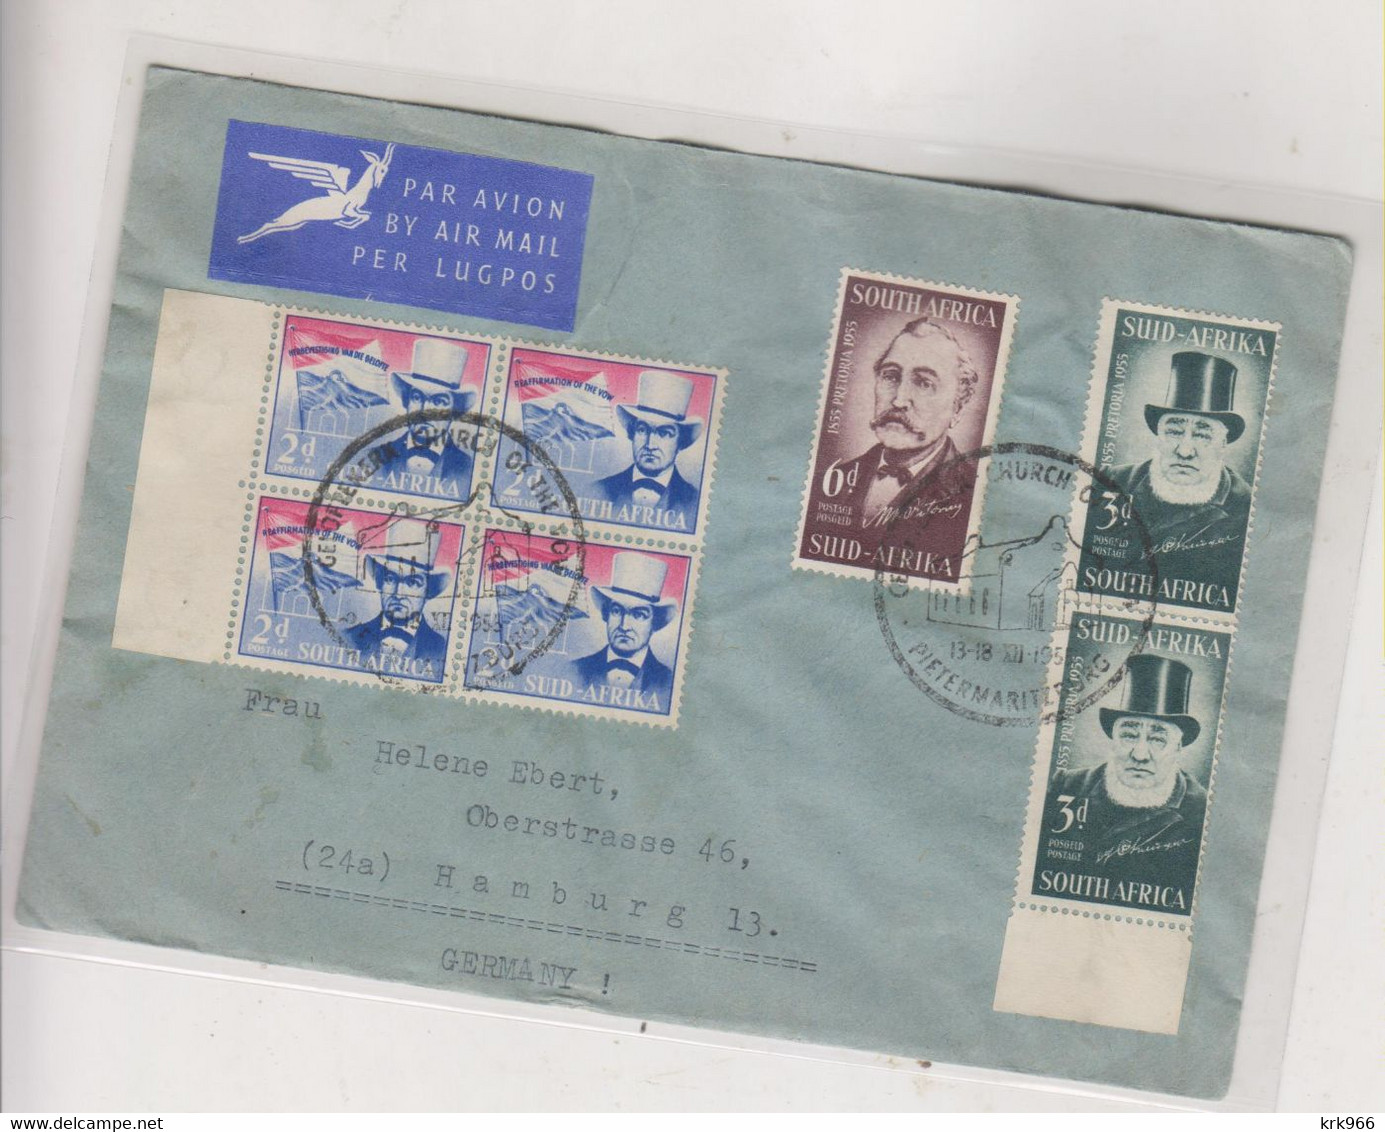 SOUTH AFRICA 1955 Pietermaritzburg Nice Airmail Cover To Germany - Luftpost